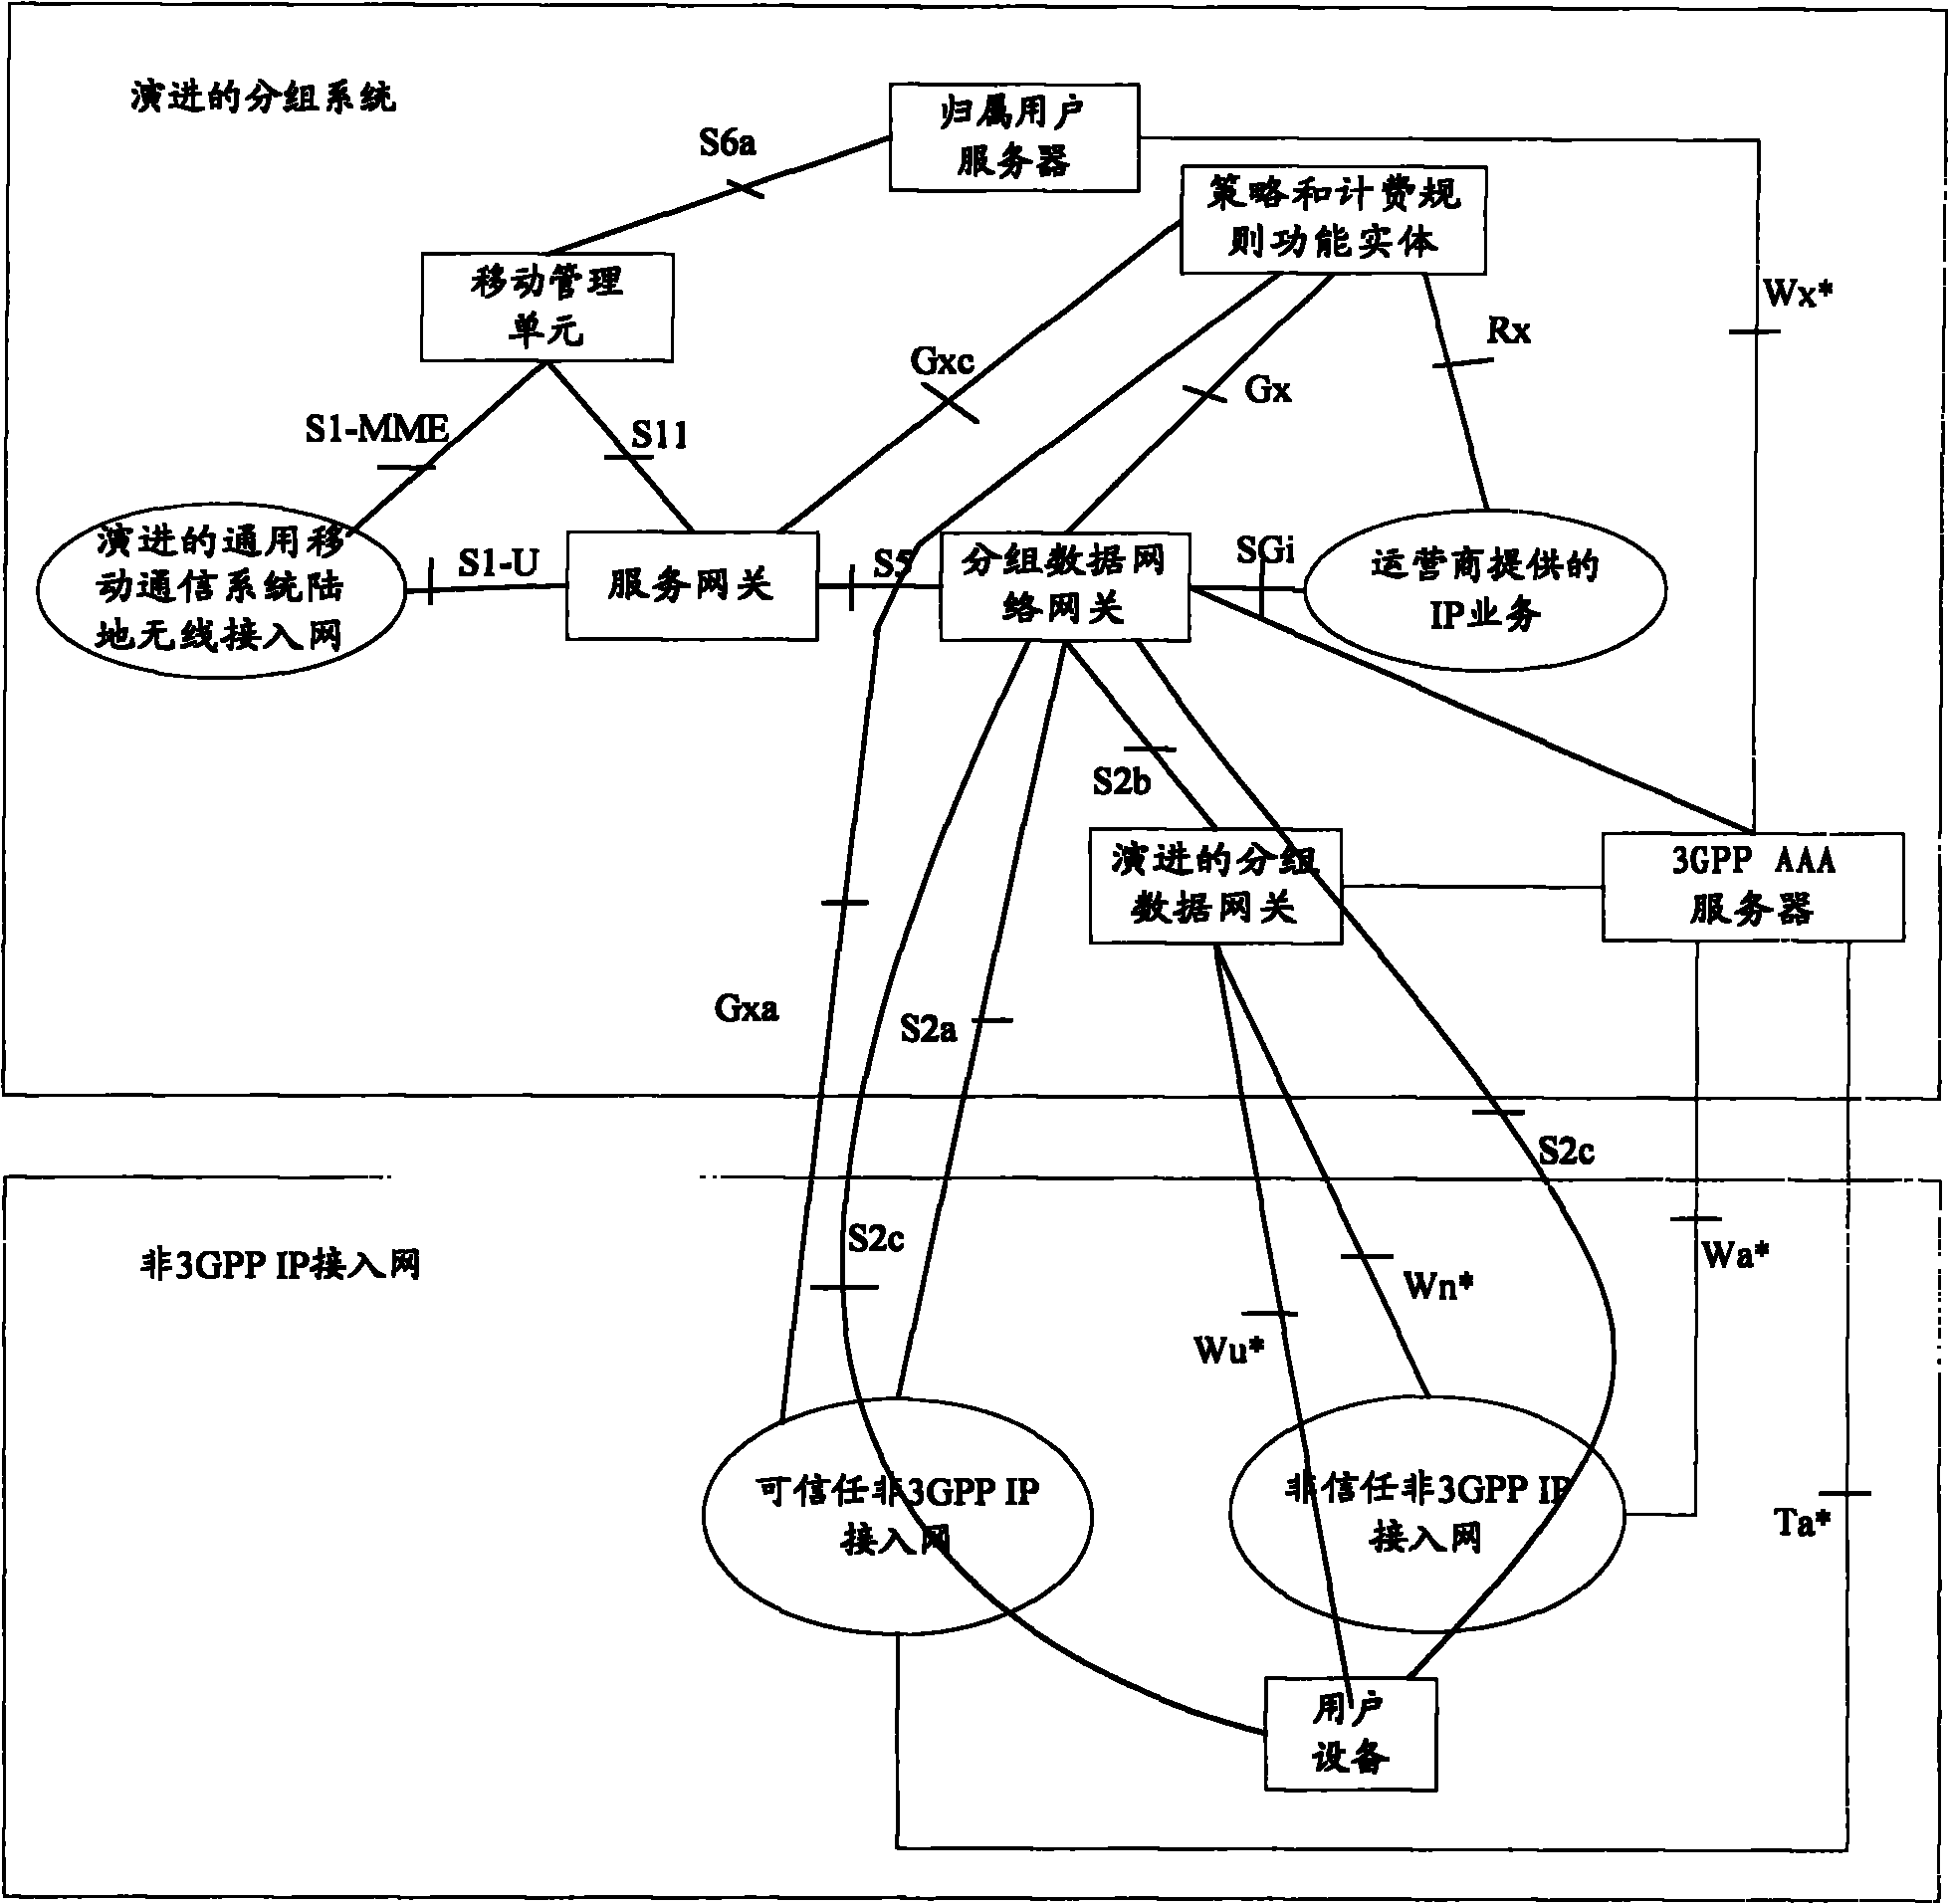 Method and system for sending out PCC (program-controlled computer) strategy information